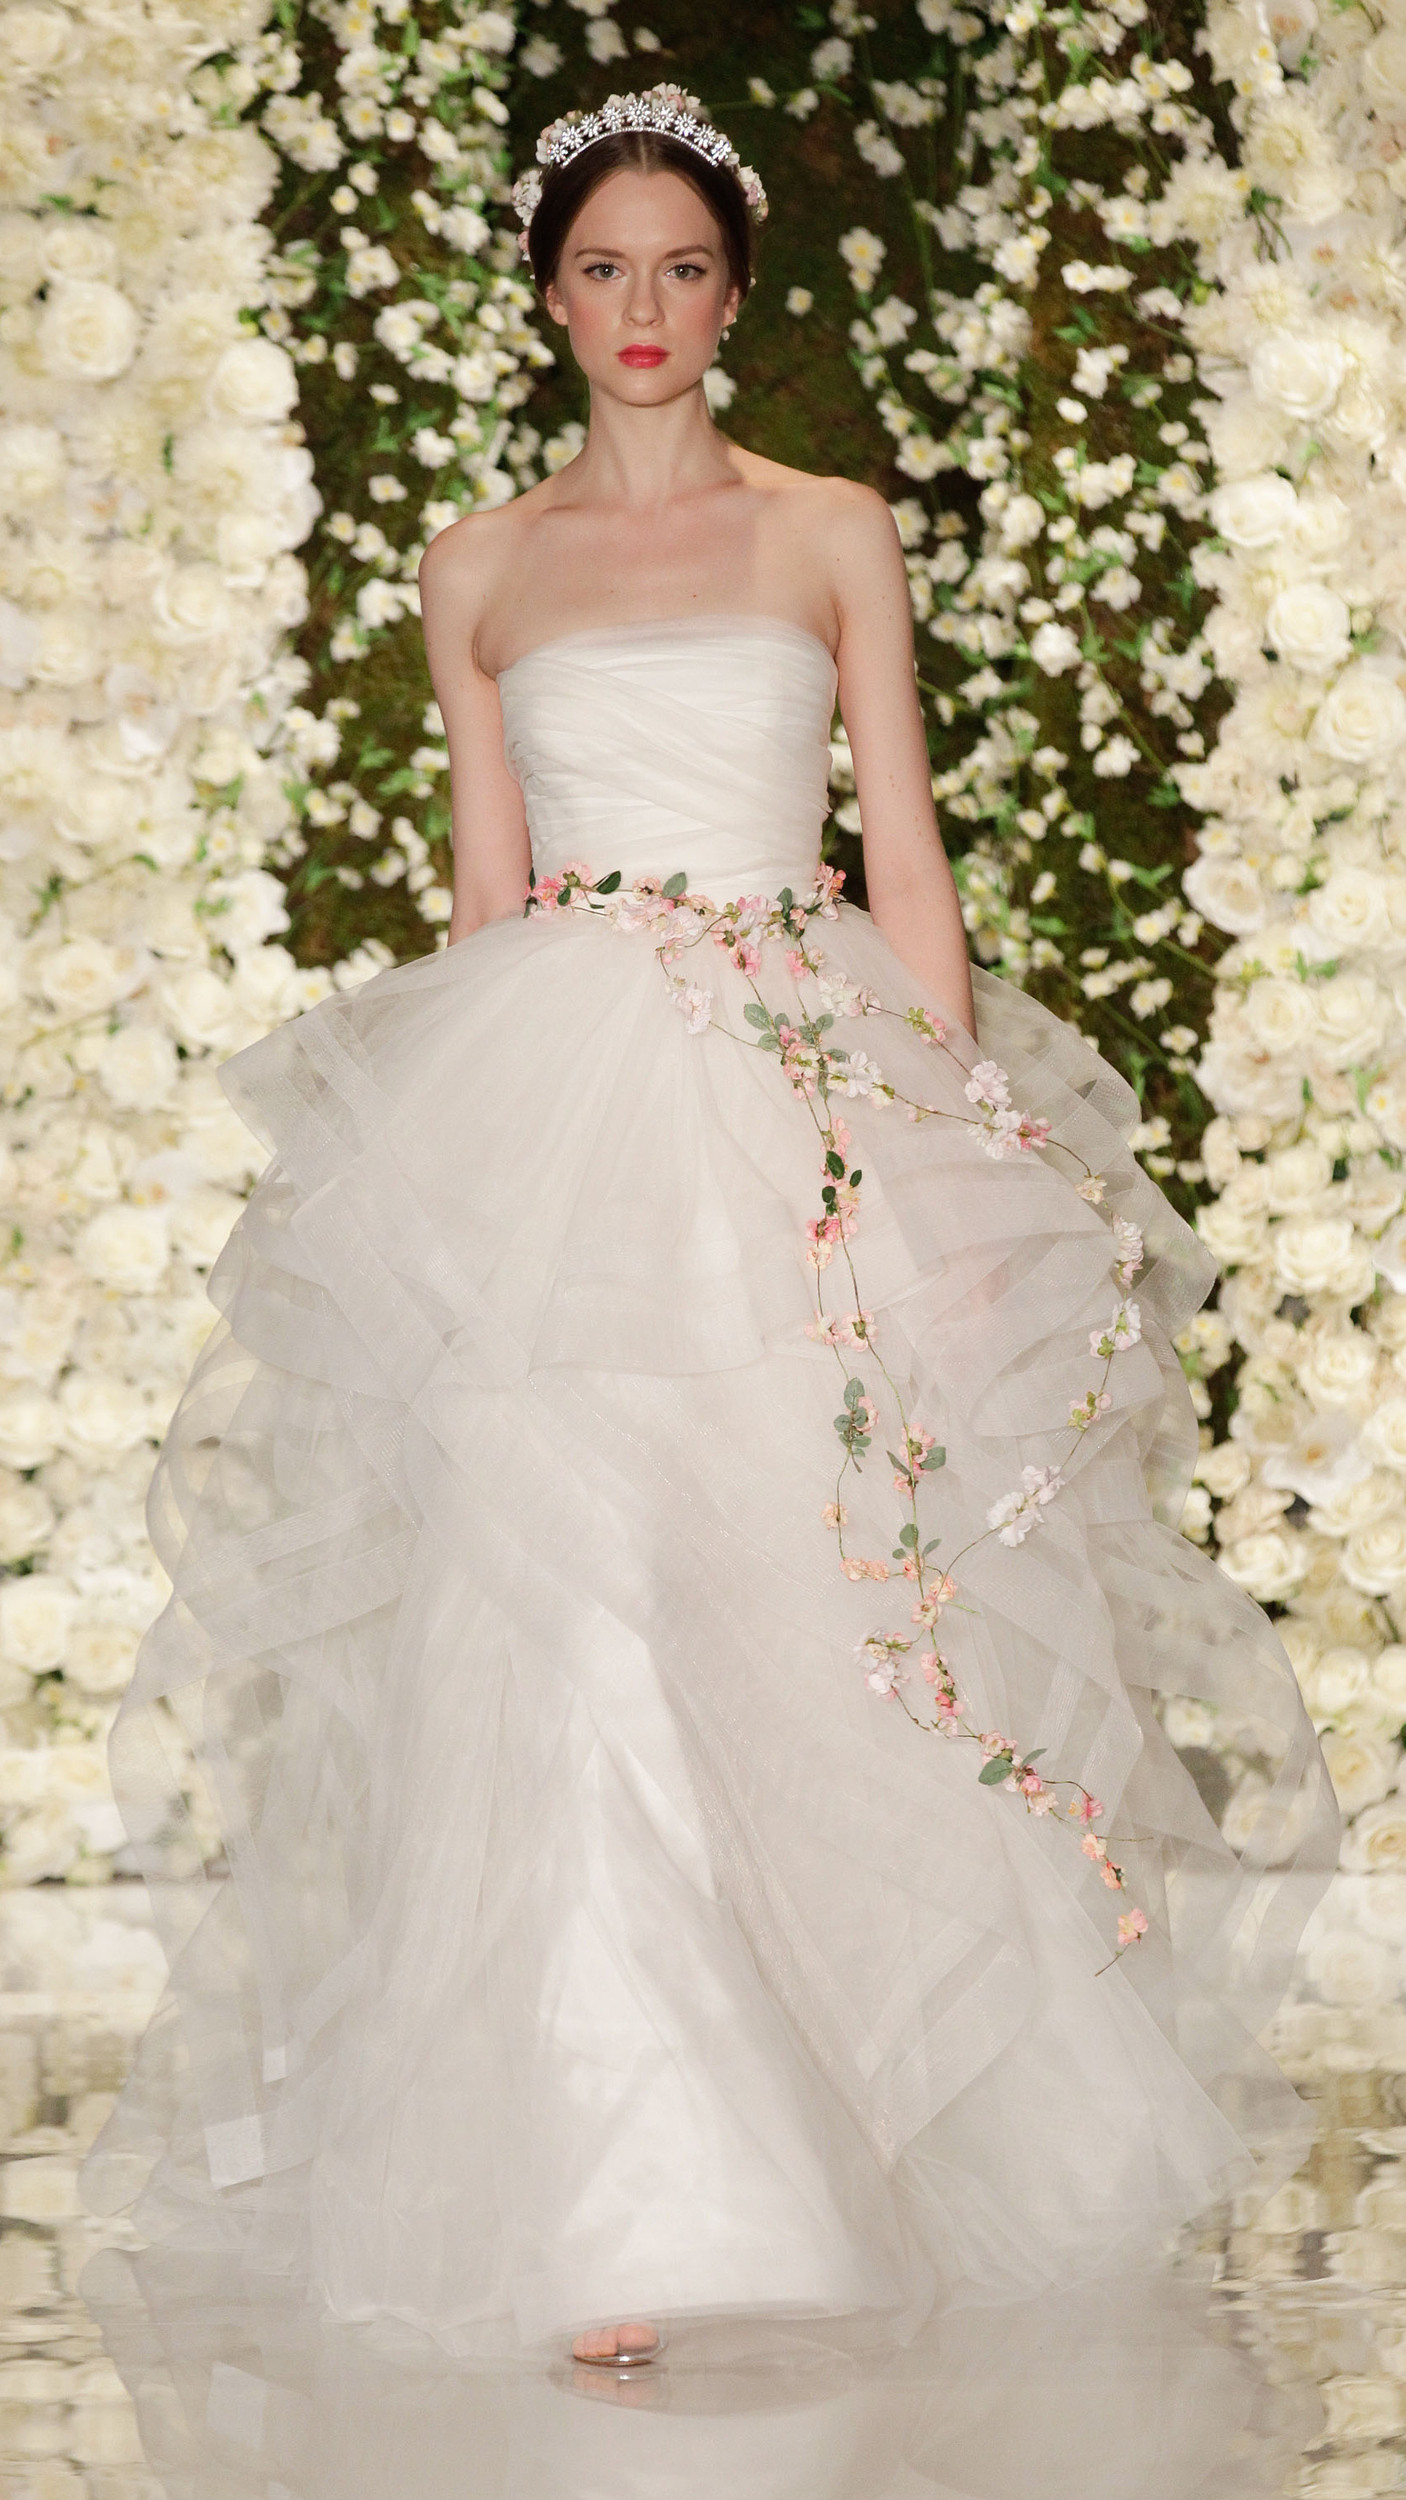 Most Beautiful Wedding Gowns
 The most beautiful wedding gowns from Fall 2015 Bridal